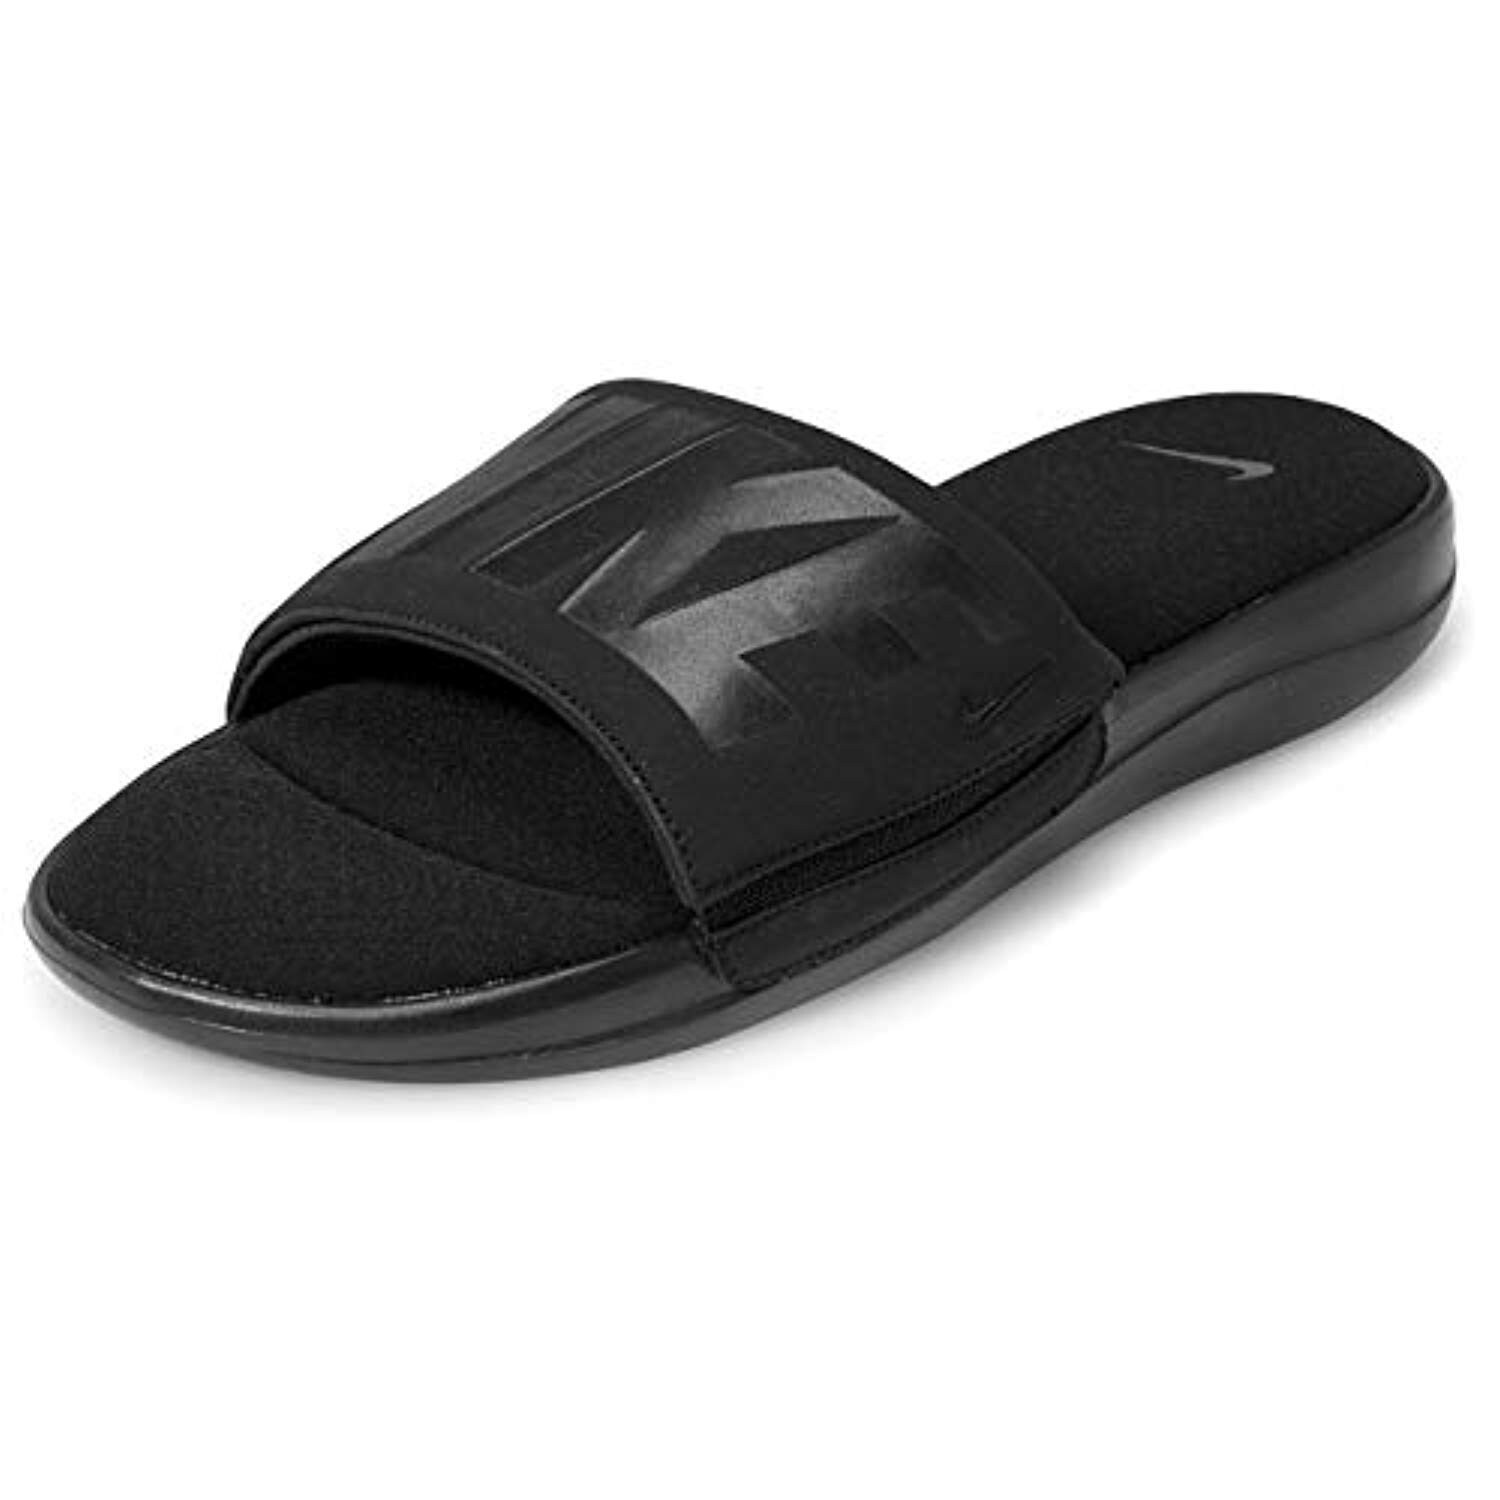 nike sandals with memory foam